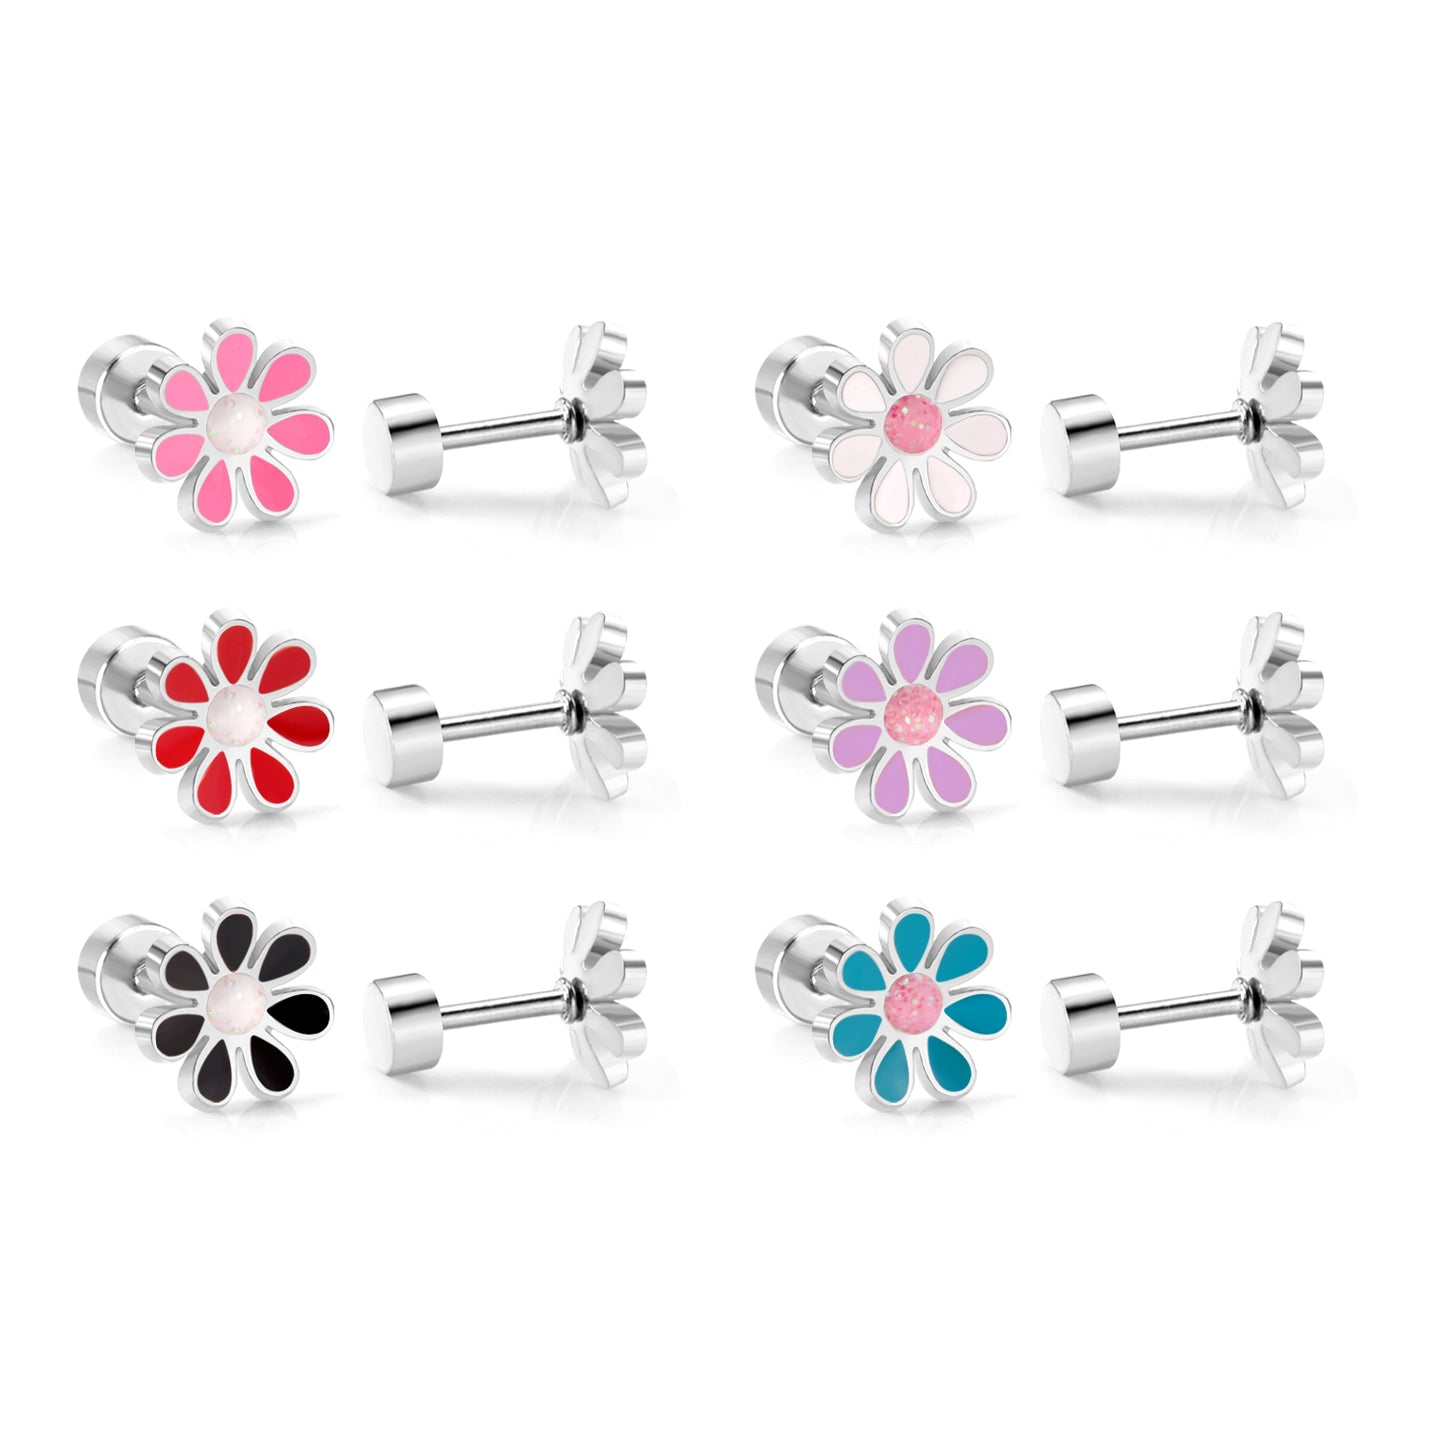 Children's Earrings:  Surgical Steel White/Pink Flowers with Screw Backs with Gift Box